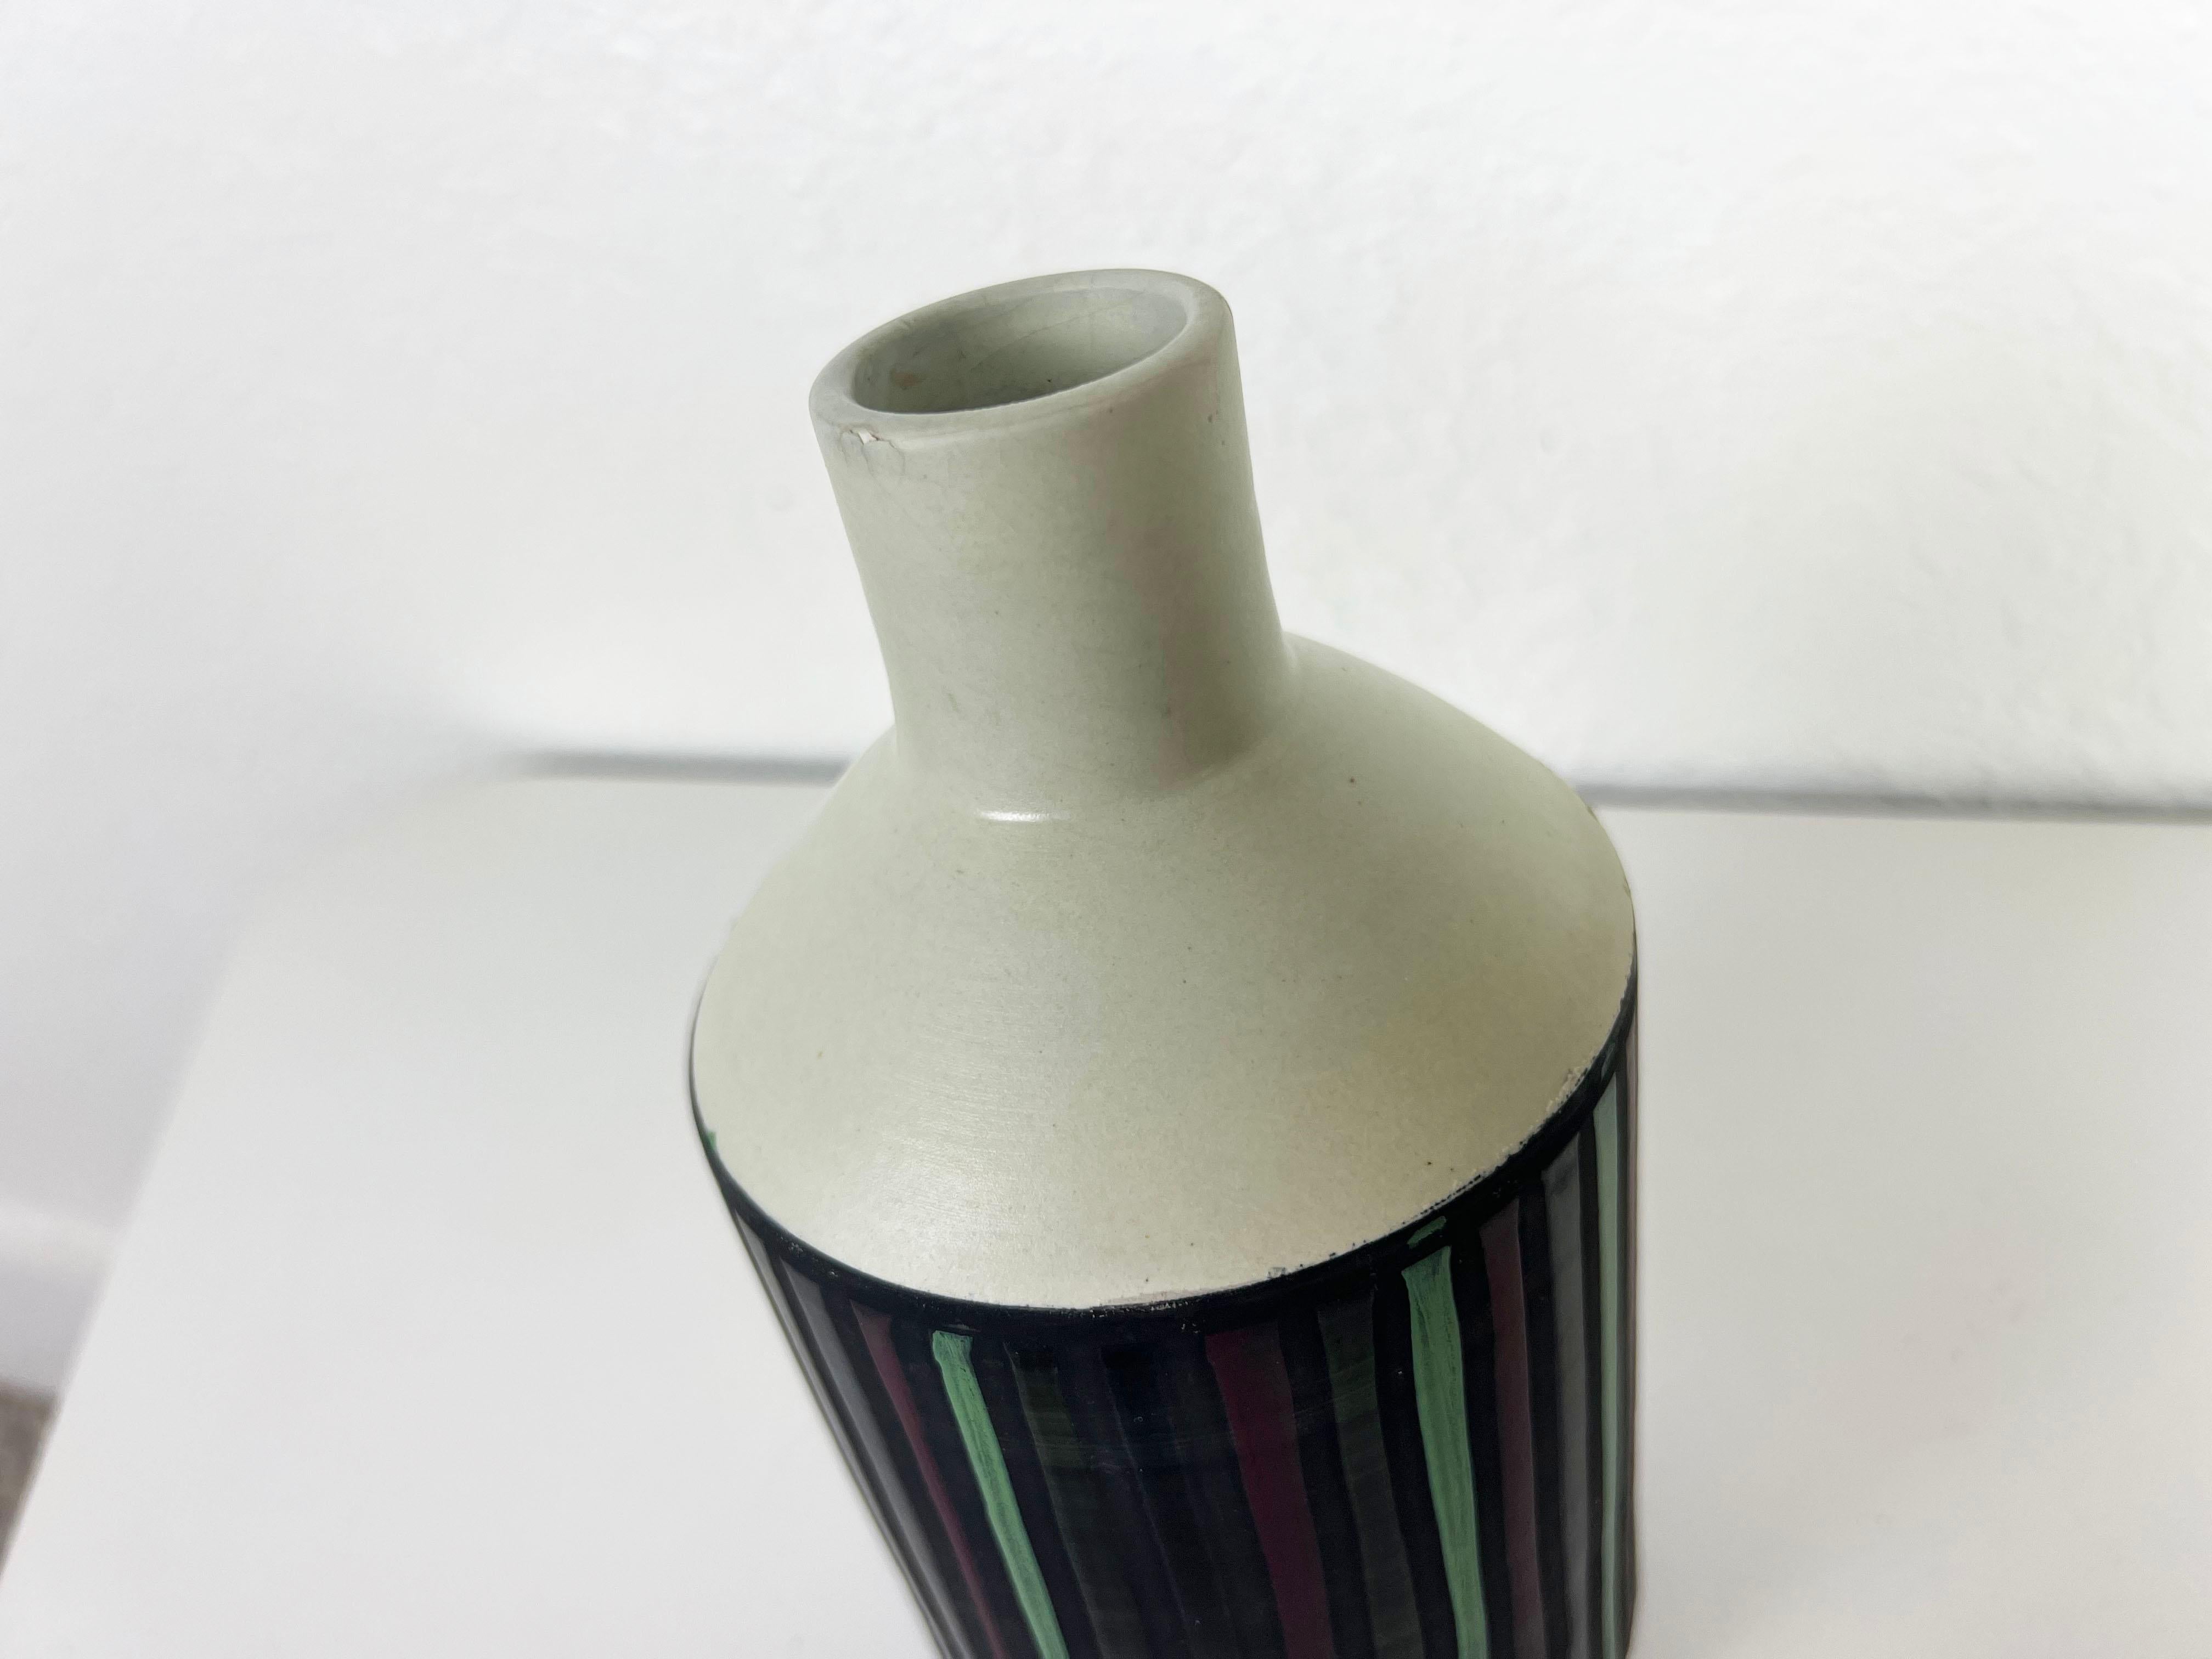 Small Ceramic Vase by Ettore Sottsass for Bitossi, 1959 For Sale 8